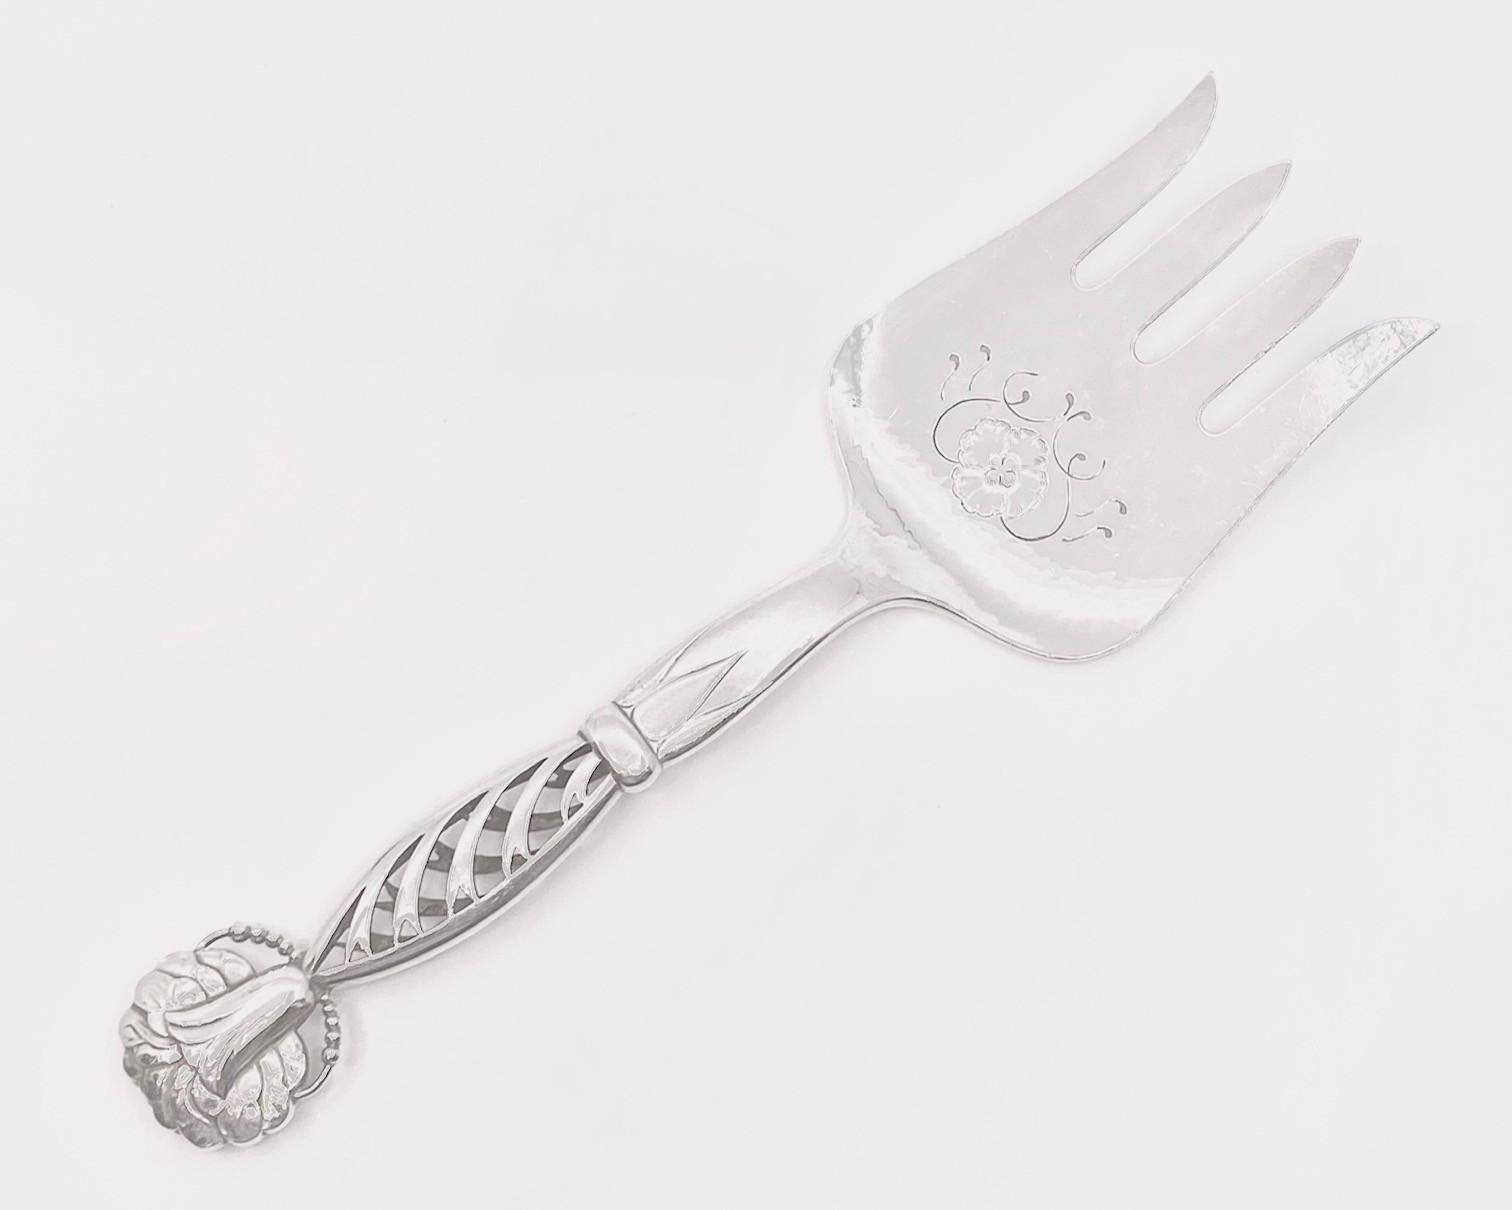 This is a large sterling silver Georg Jensen fish serving fork, in Ornamental pattern #83 by Georg Jensen from circa 1914.

Additional Information:
Material: Sterling Silver
Style: Art Nouveau
Hallmarks: With post 1944 Georg Jensen hallmark, made in